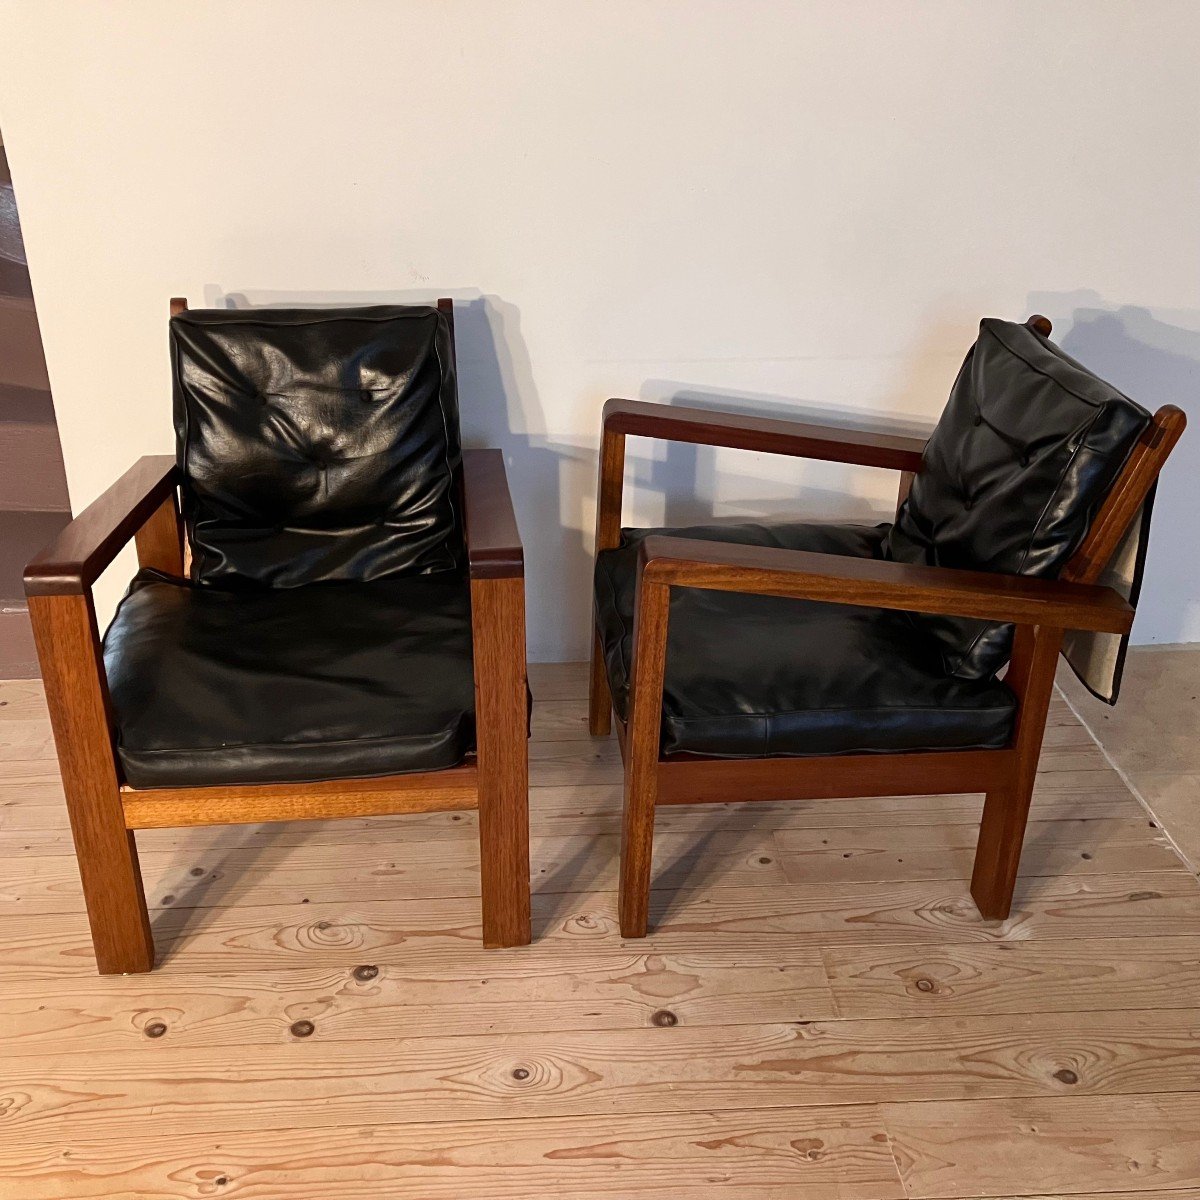 Pair Of Armchairs From The 1940s-1950s In Mahogany Or Teak.-photo-2